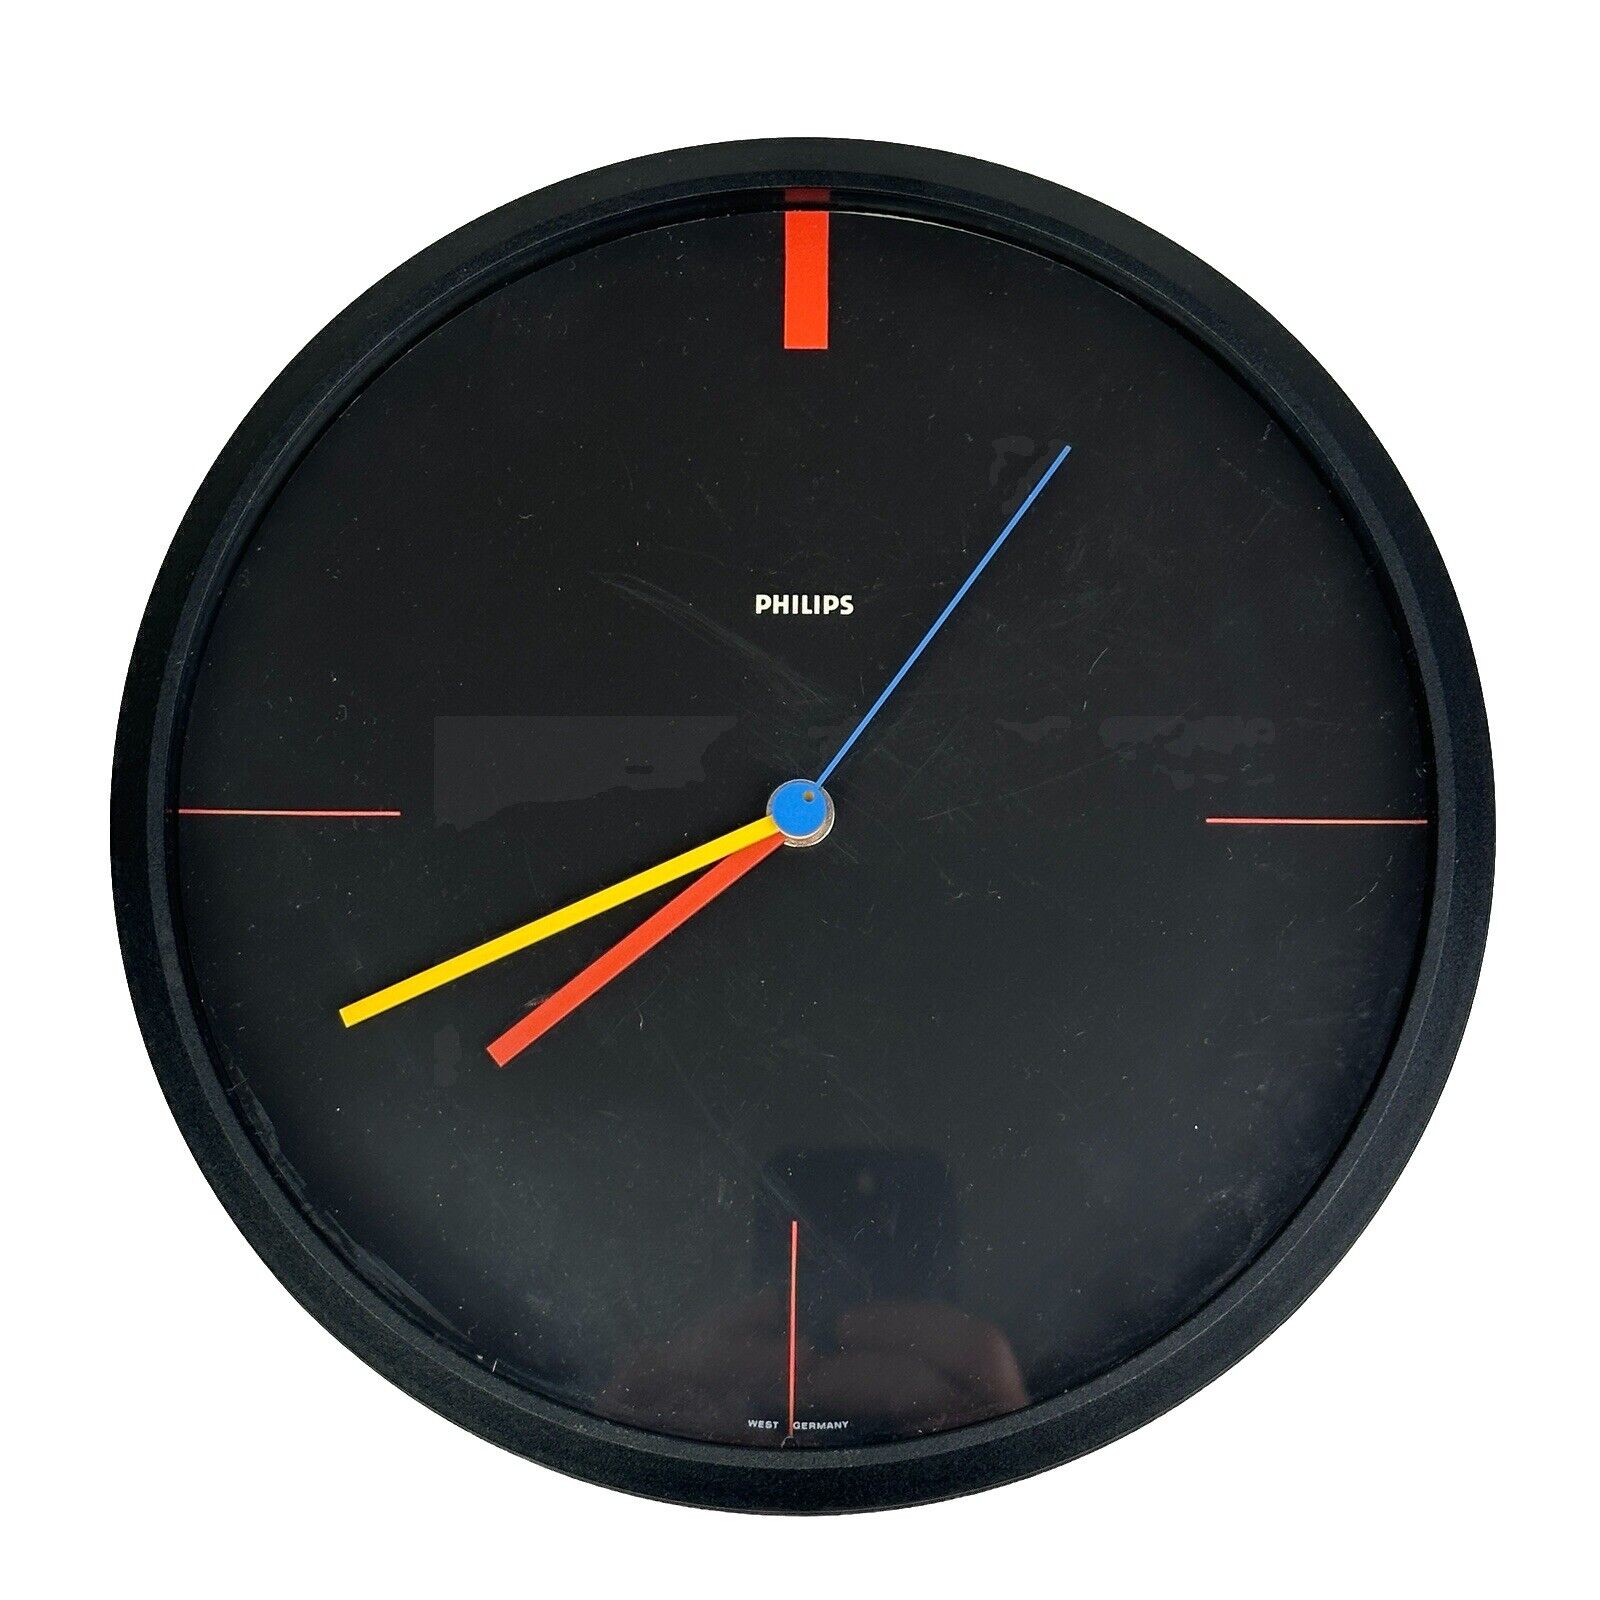 1980S POSTMODERN PRIMARY COLOR PHILIPS WALL CLOCK WEST GERMANY